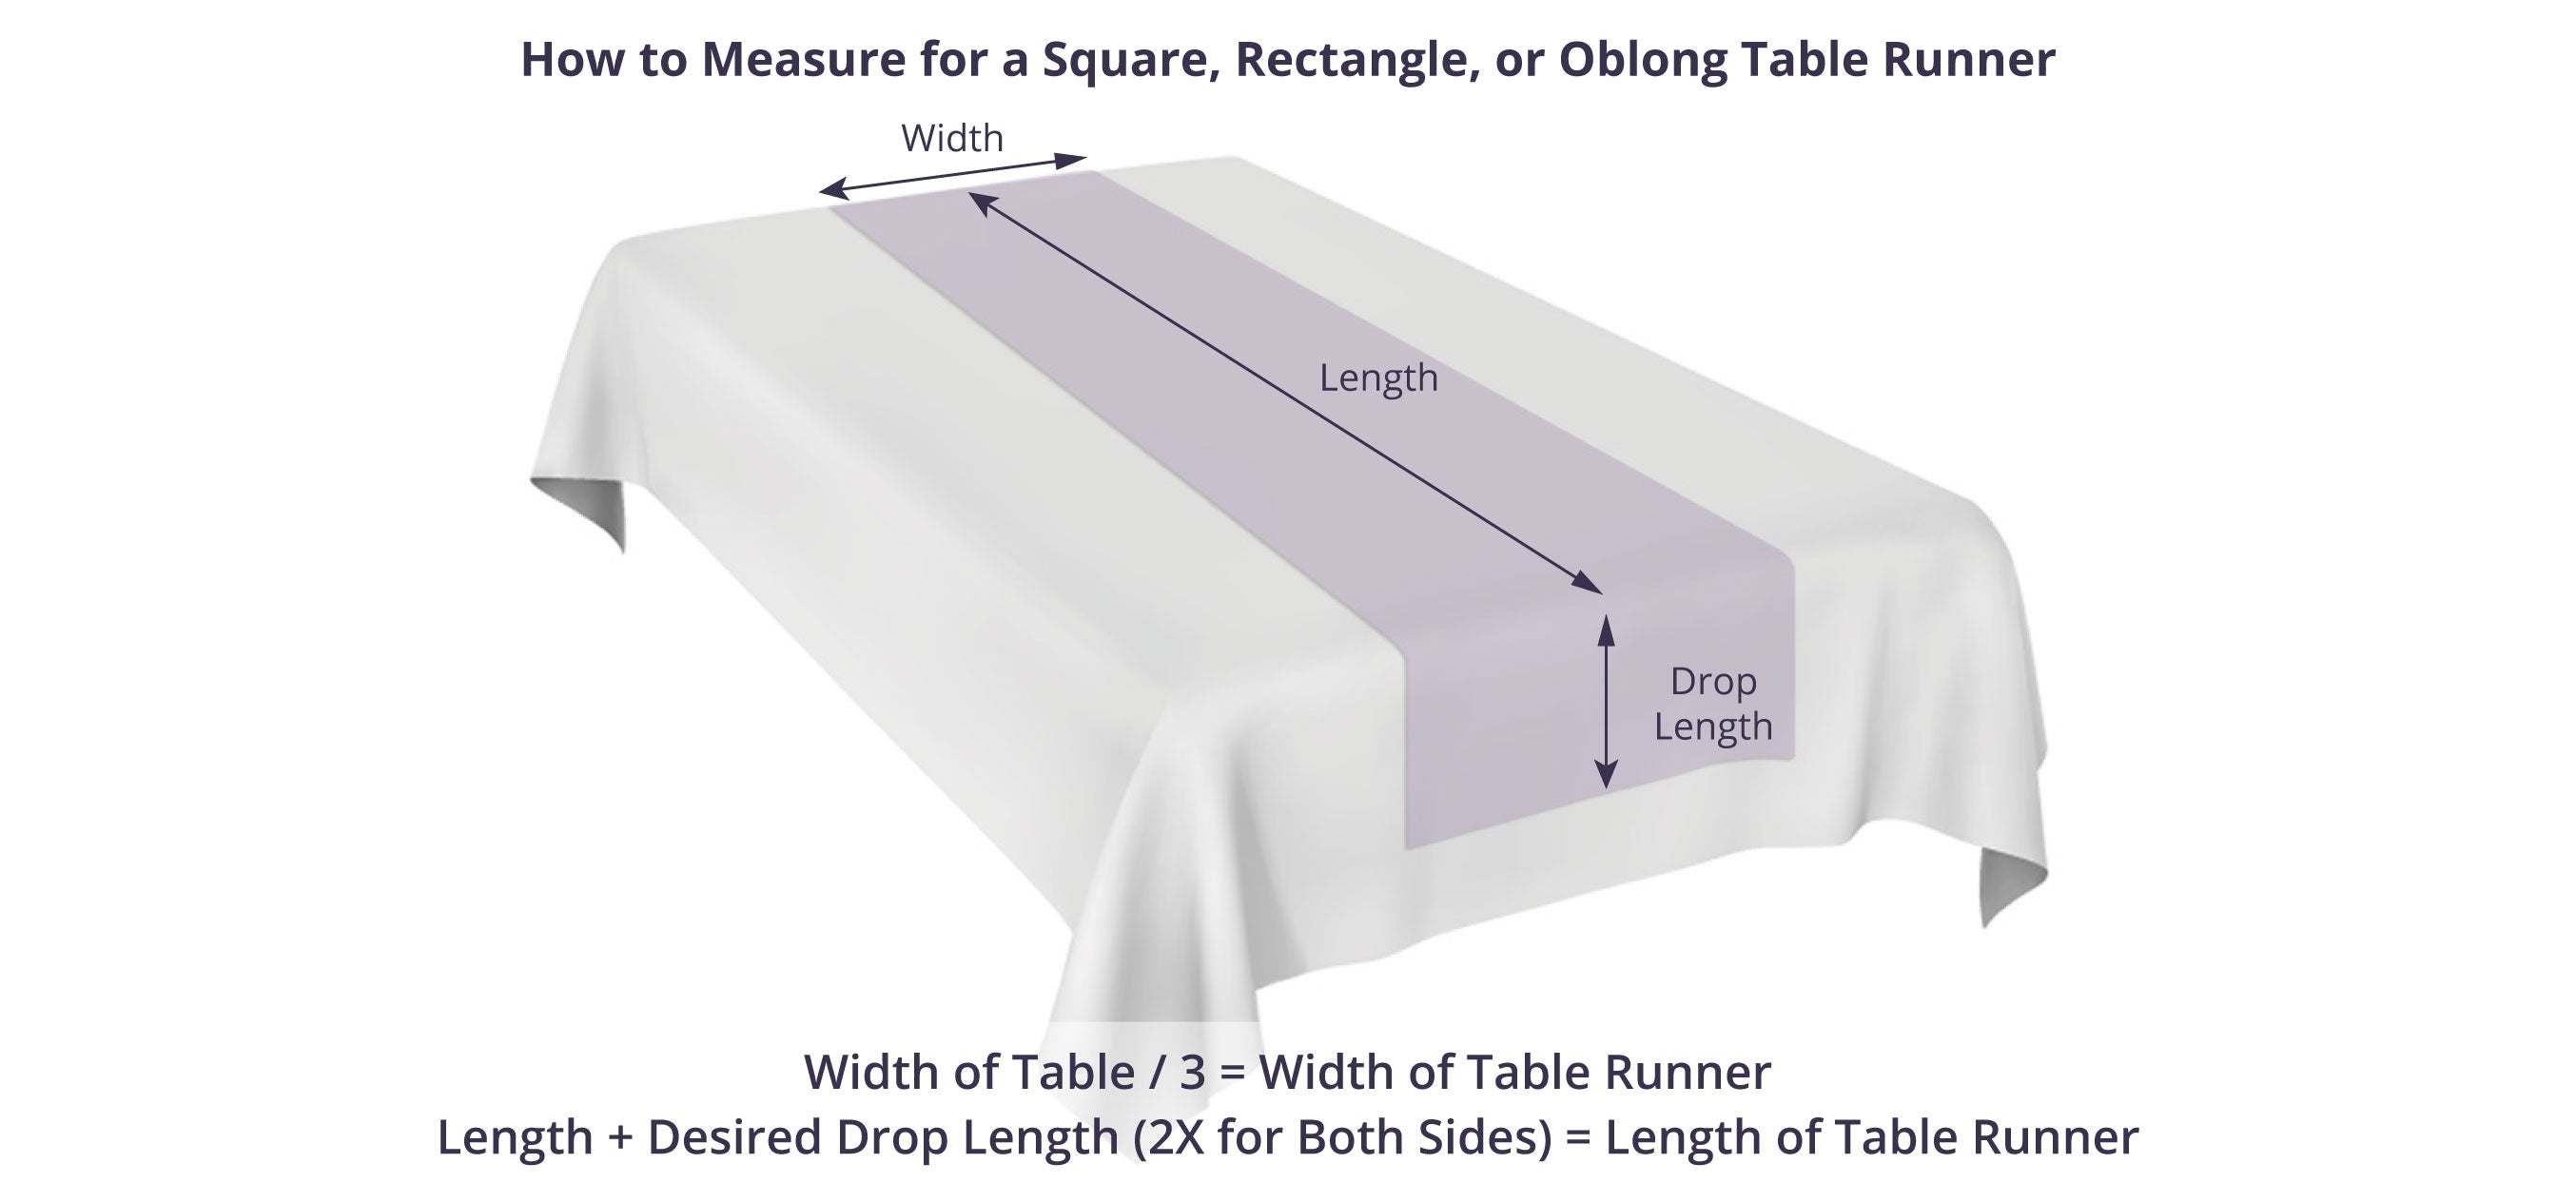 Measuring a Table Runner for a Square, Rectangular, or Oblong Table